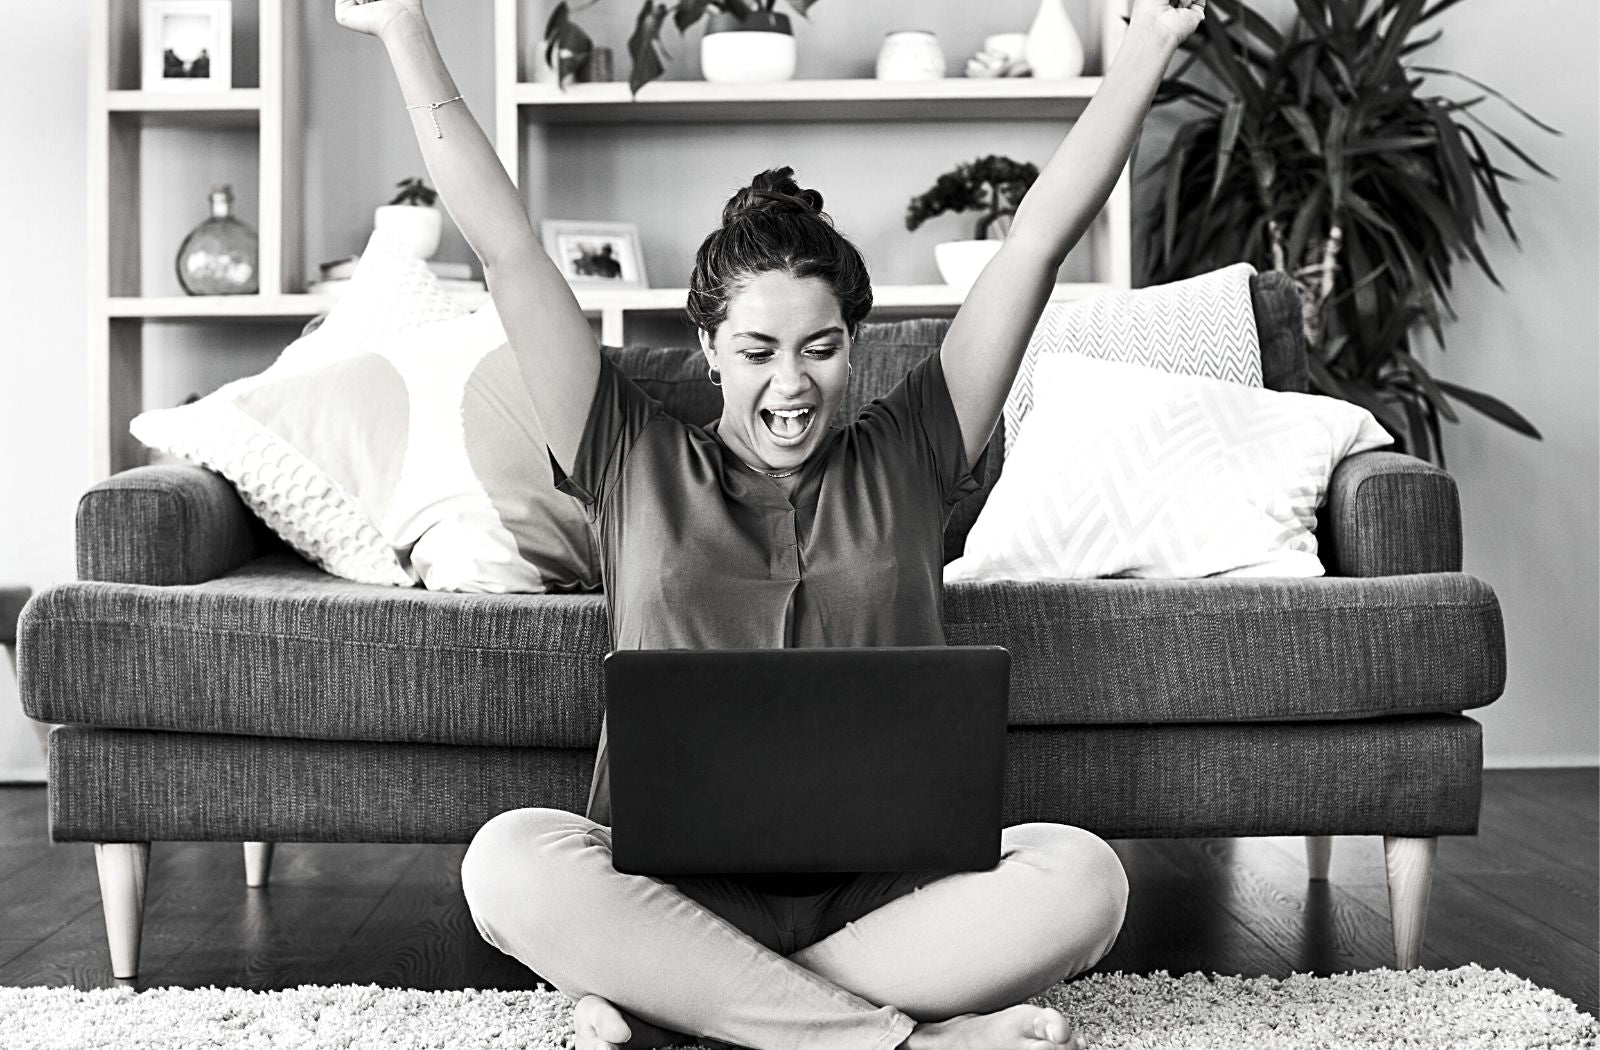 excited young woman sitting on living room floor with laptop arms in air showing she is enthusiastic person